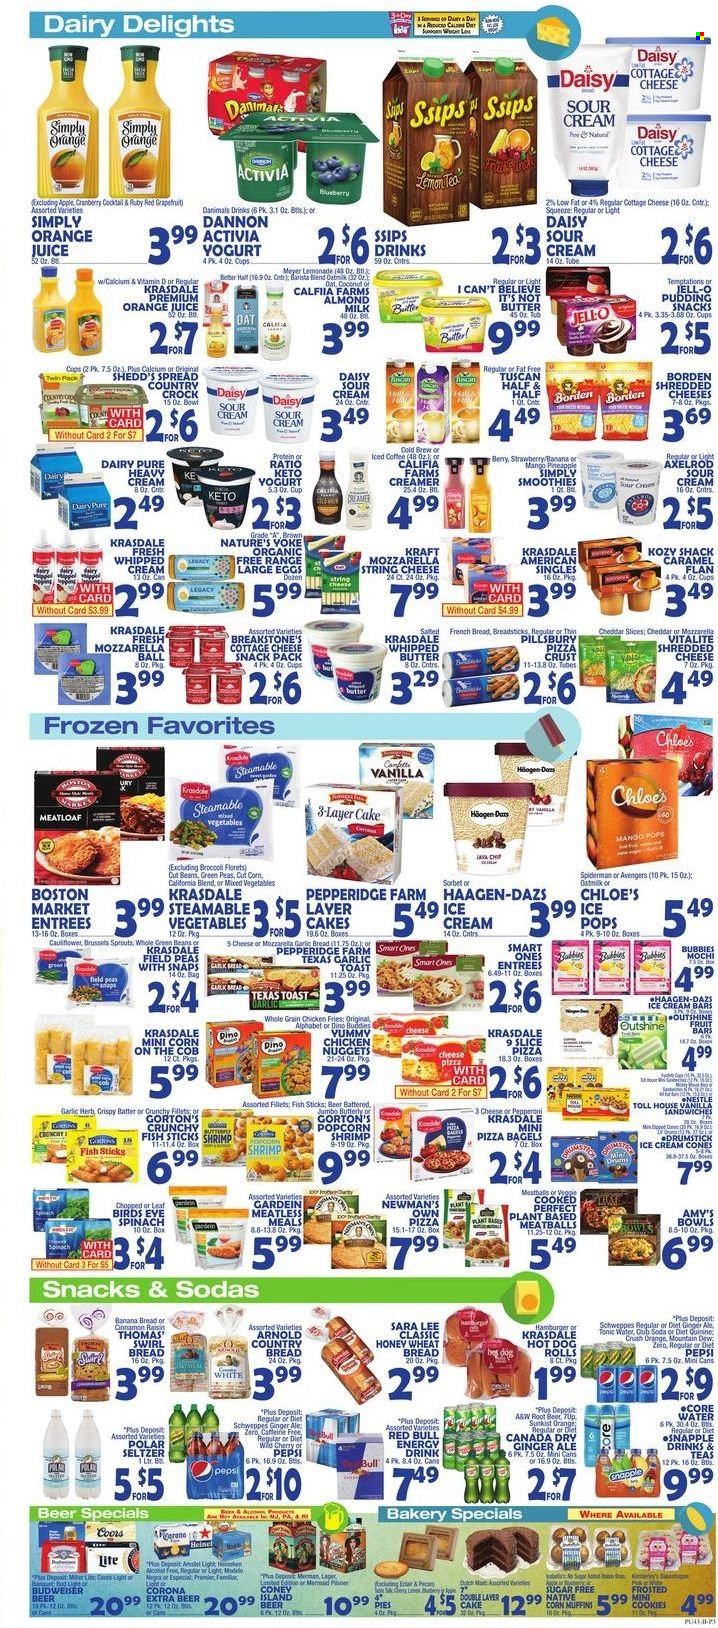 thumbnail - Bravo Supermarkets Flyer - 09/30/2022 - 10/06/2022 - Sales products - bagels, wheat bread, hot dog rolls, Sara Lee, french bread, muffin, banana bread, broccoli, corn, green beans, brussel sprouts, grapefruits, pineapple, coconut, fish, shrimps, fish fingers, Gorton's, fish sticks, pizza, meatballs, sandwich, nuggets, hamburger, Pillsbury, chicken nuggets, meatloaf, Bird's Eye, Kraft®, ham, cottage cheese, shredded cheese, string cheese, cheddar, pudding, yoghurt, Activia, Dannon, Danimals, milk, large eggs, whipped butter, I Can't Believe It's Not Butter, sour cream, whipped cream, creamer, ice cream, ice cream bars, Häagen-Dazs, mixed vegetables, potato fries, cookies, Nestlé, bread sticks, Jell-O, caramel, Canada Dry, ginger ale, lemonade, Mountain Dew, Schweppes, Pepsi, orange juice, juice, energy drink, tonic, Diet Pepsi, Red Bull, Snapple, A&W, smoothie, Club Soda, seltzer water, iced coffee, tea, beer, Corona Extra, Lager, Modelo, Avengers, Spiderman, Fairy, Chloé, Budweiser, Half and half, Coors. Page 3.